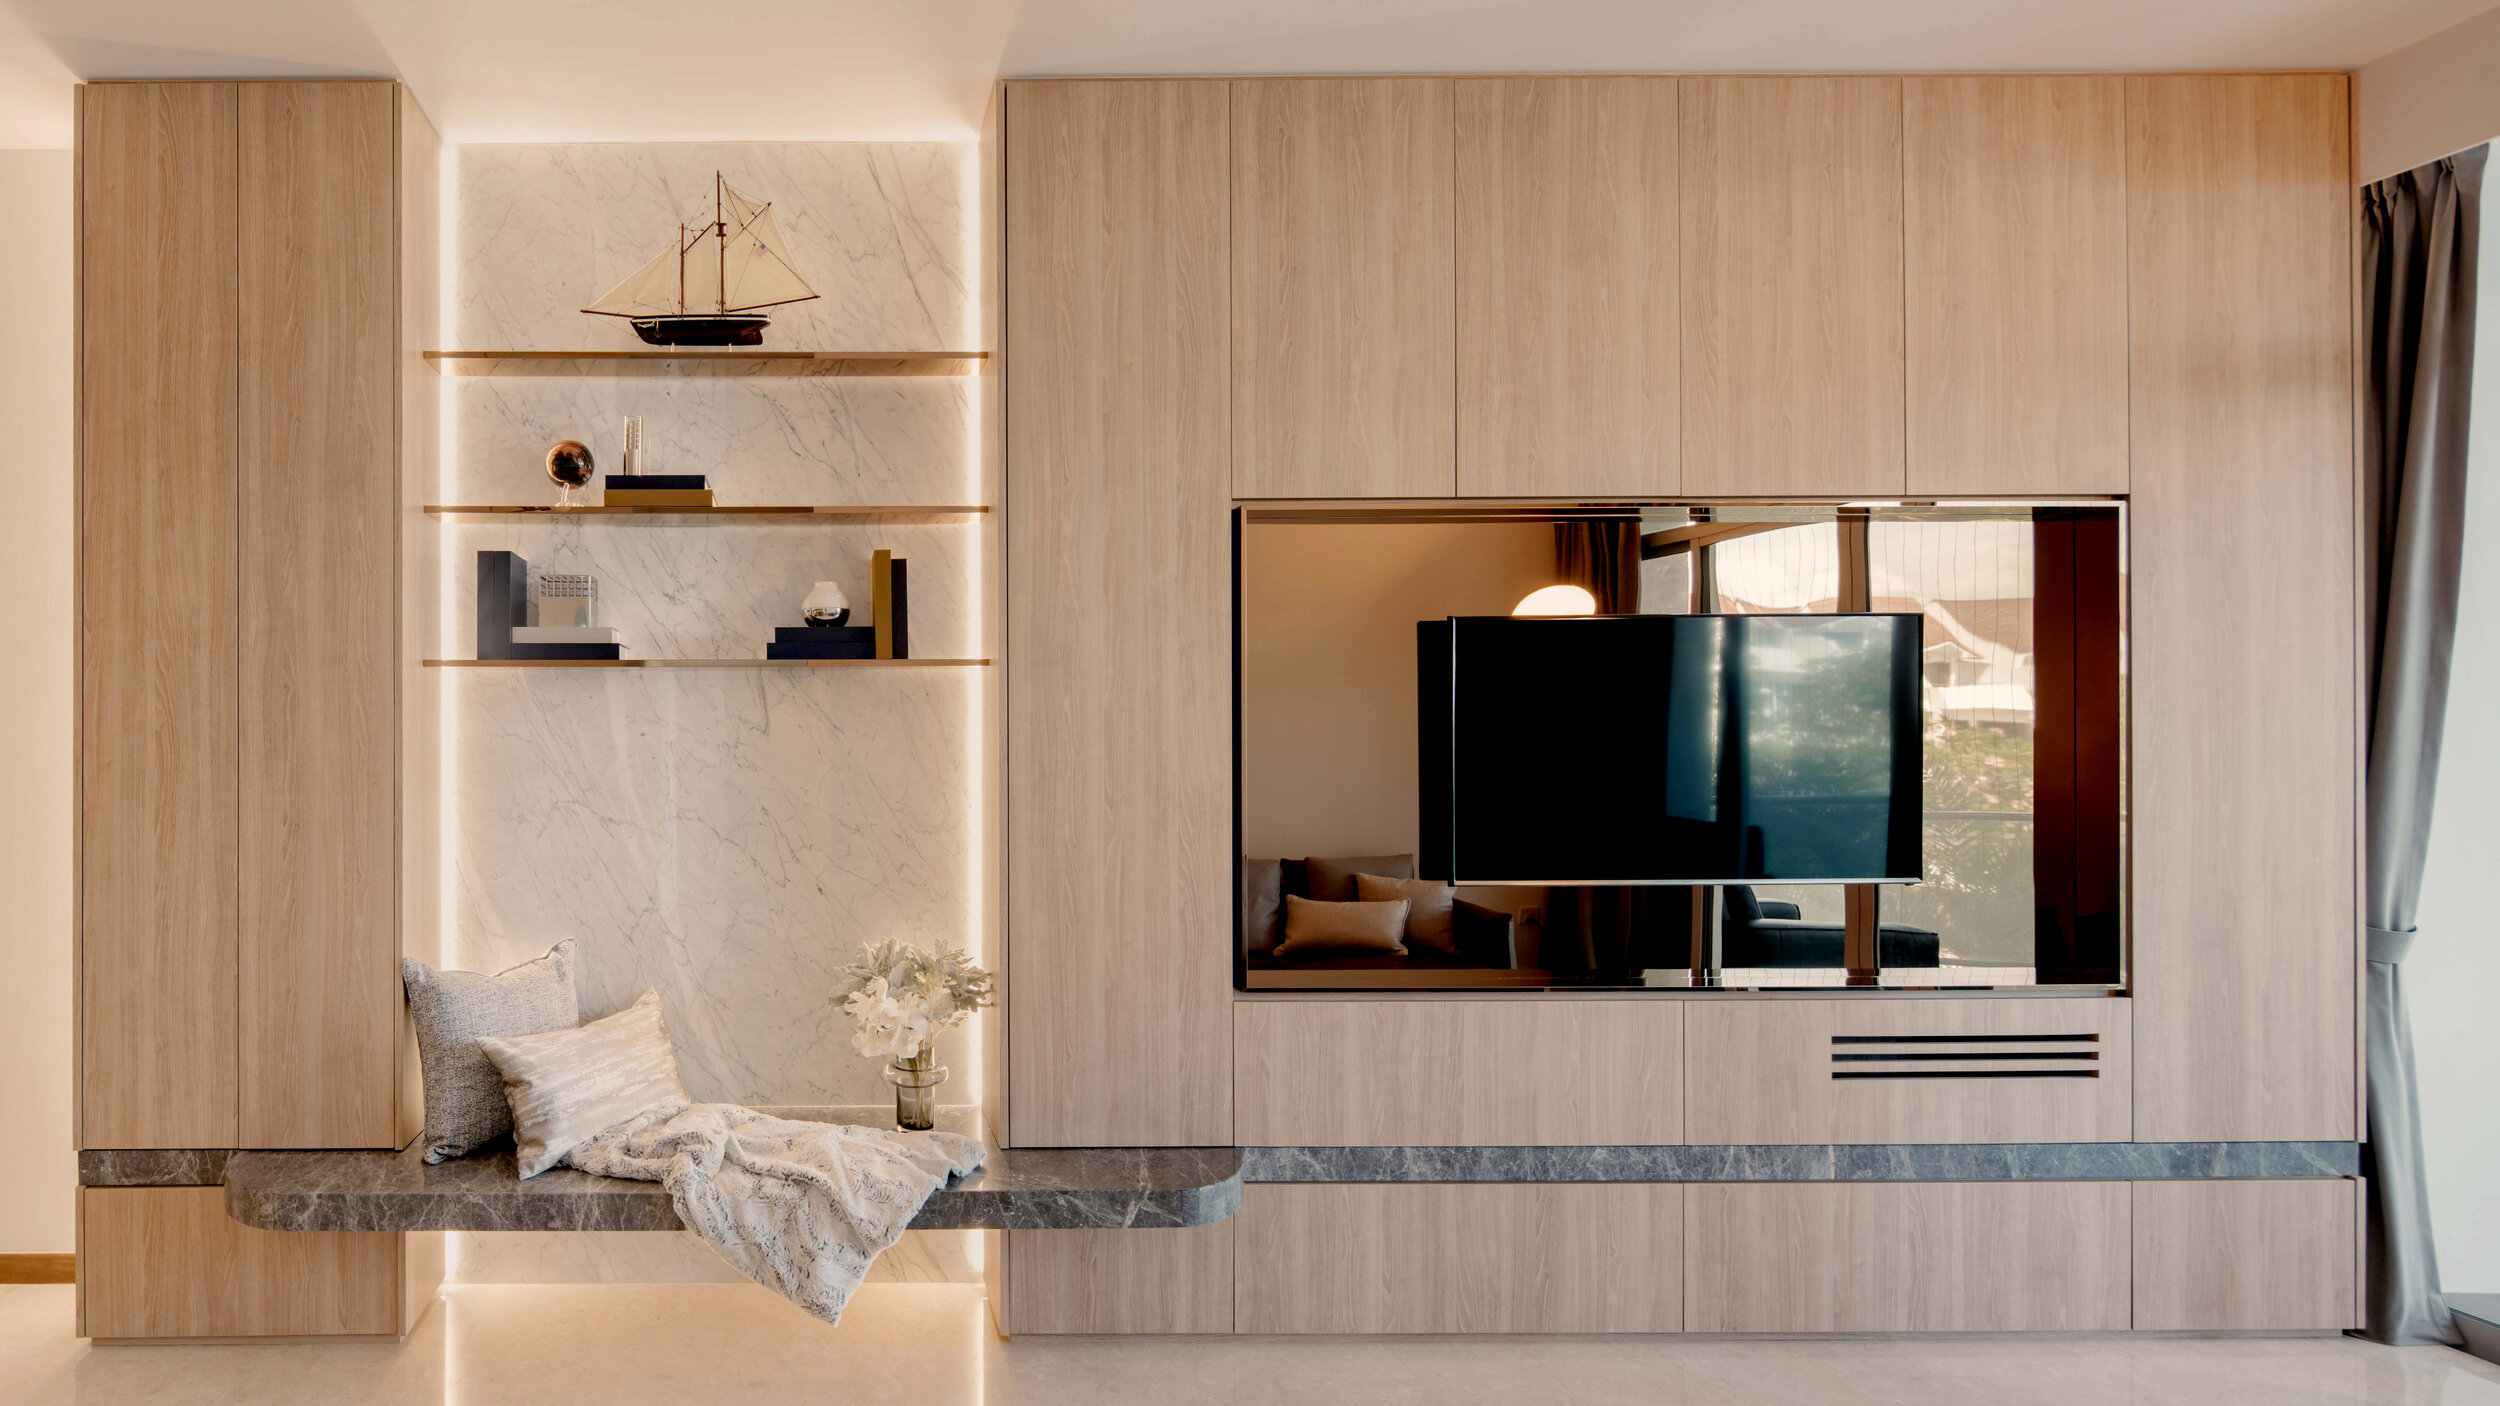  CONDOMINIUM / 2020  A dwelling space with understated sense of luxury using only a few material throughout the house to create a consistent harmony: light wood palette, metal, mirror and stone. The well-being oriented interior is further expressed t